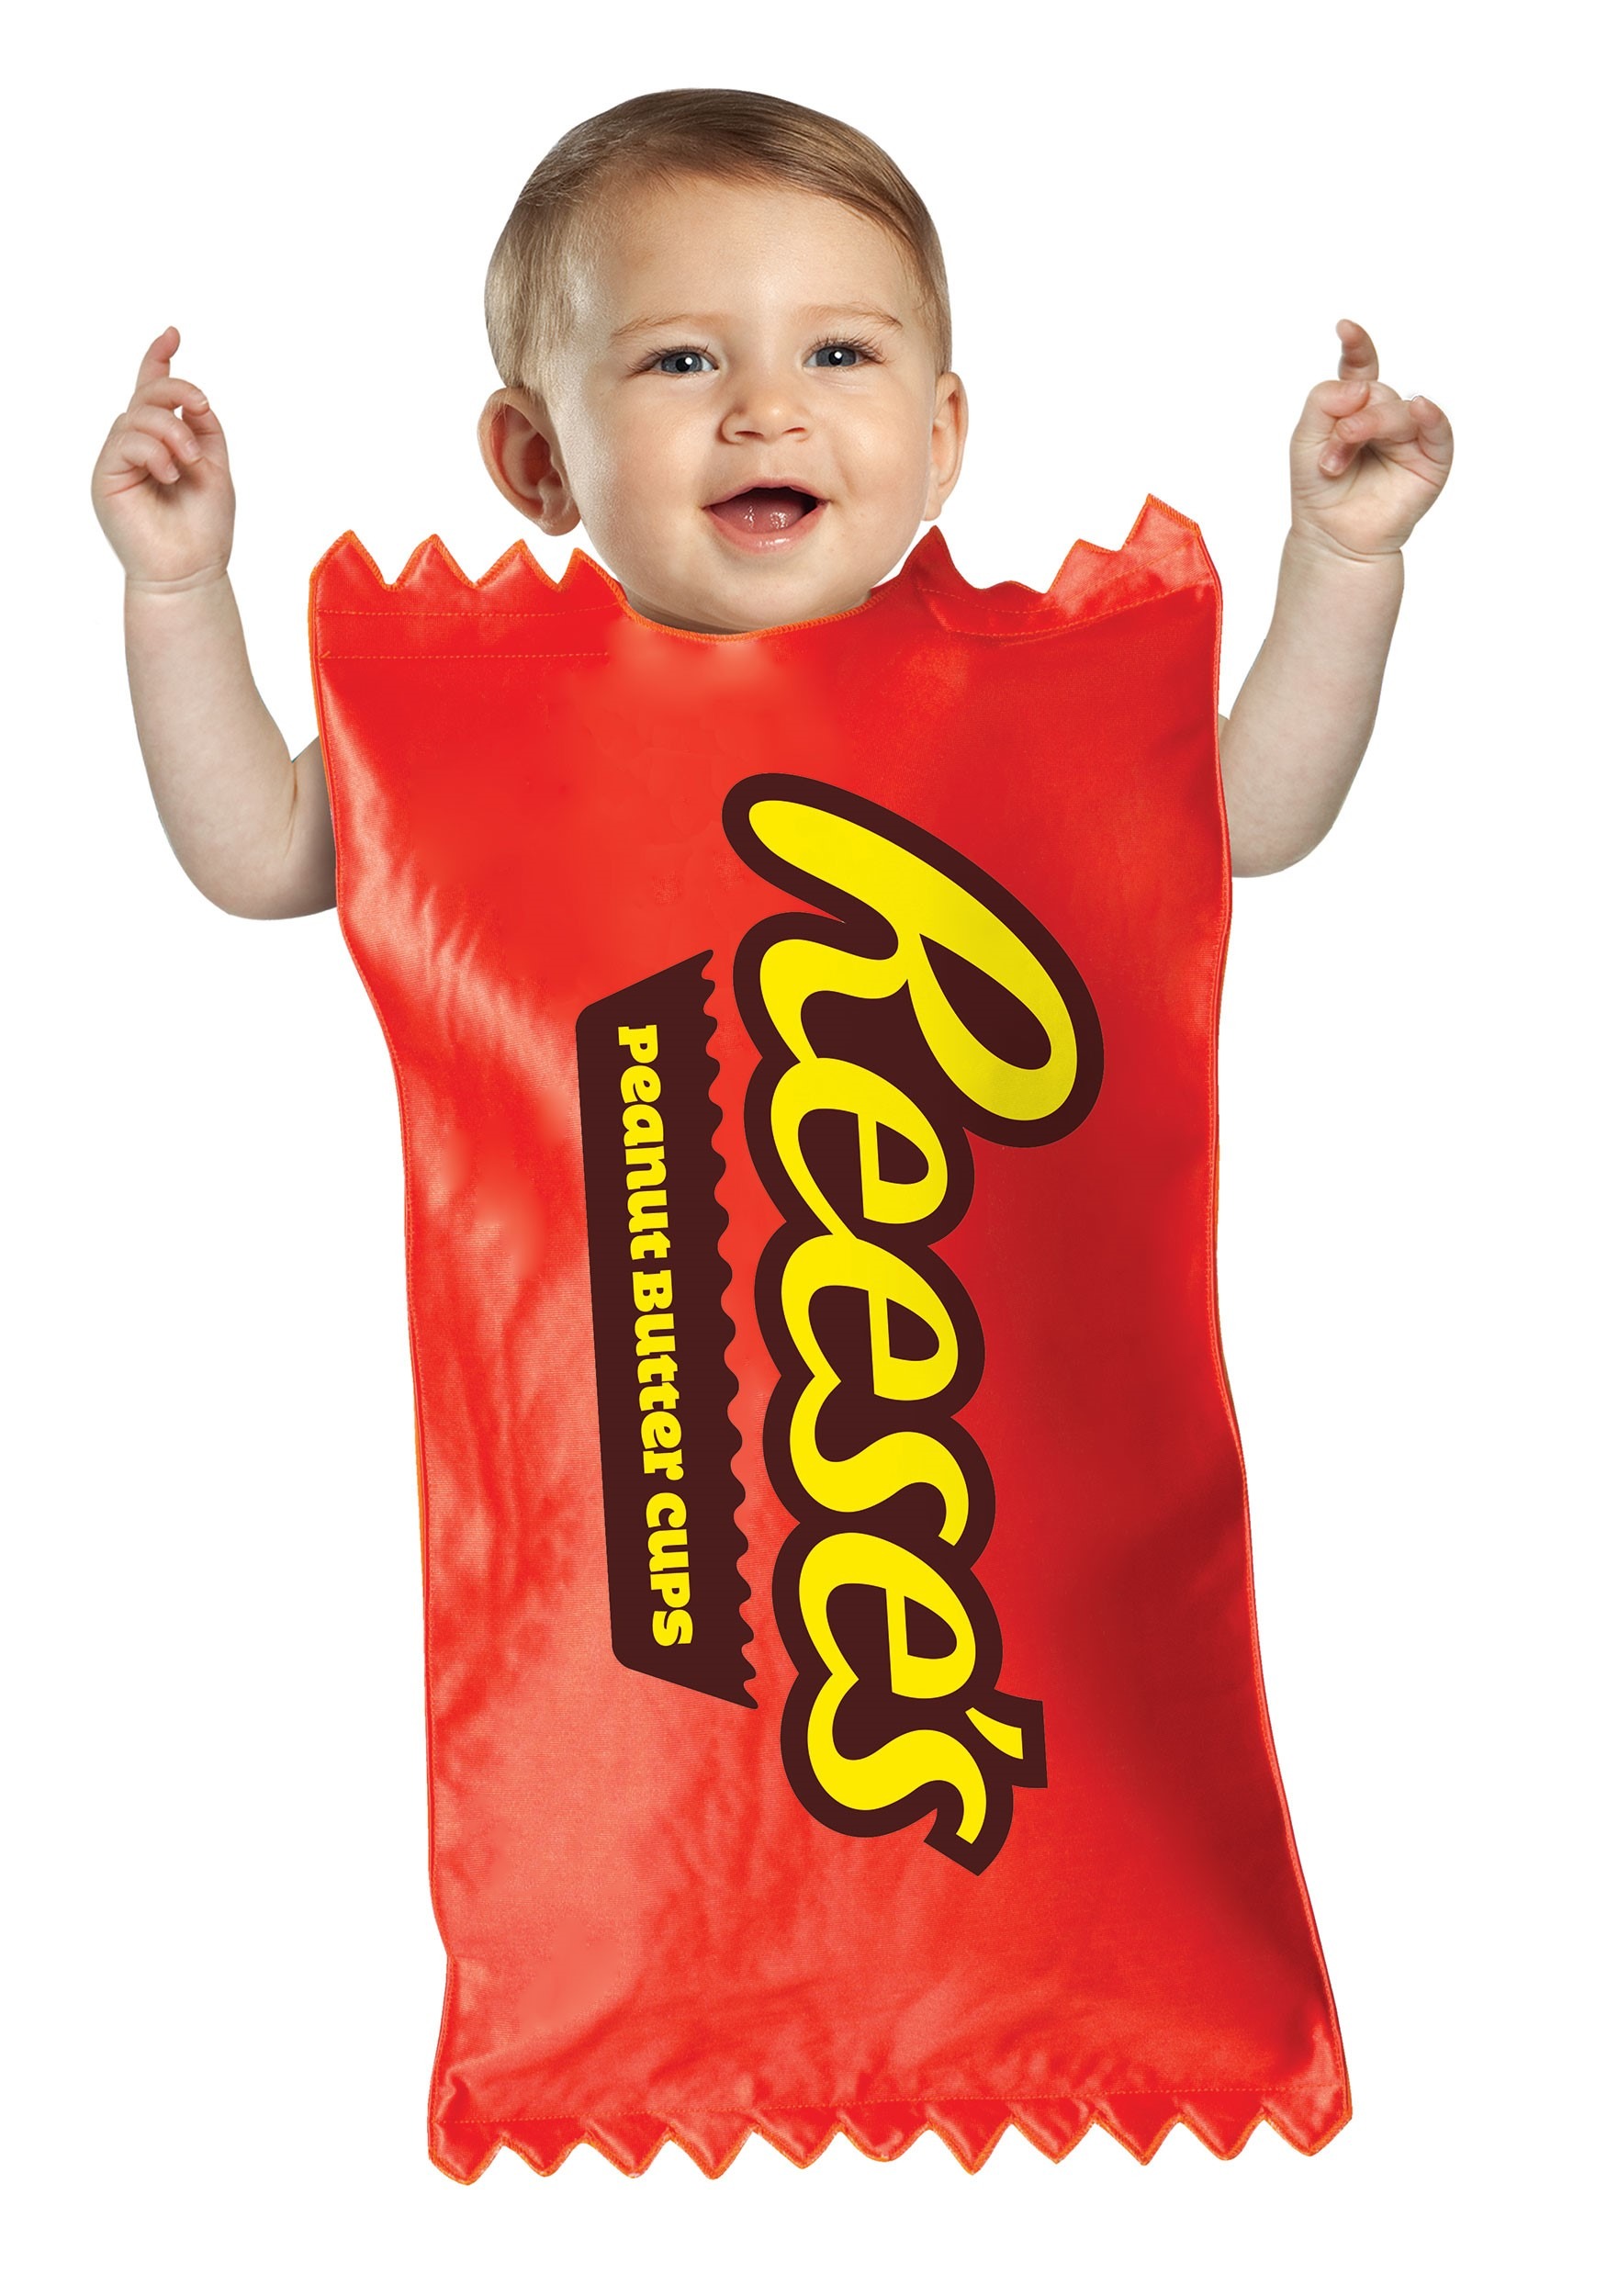 Reese’s Infant Reese’s Cup Buntington